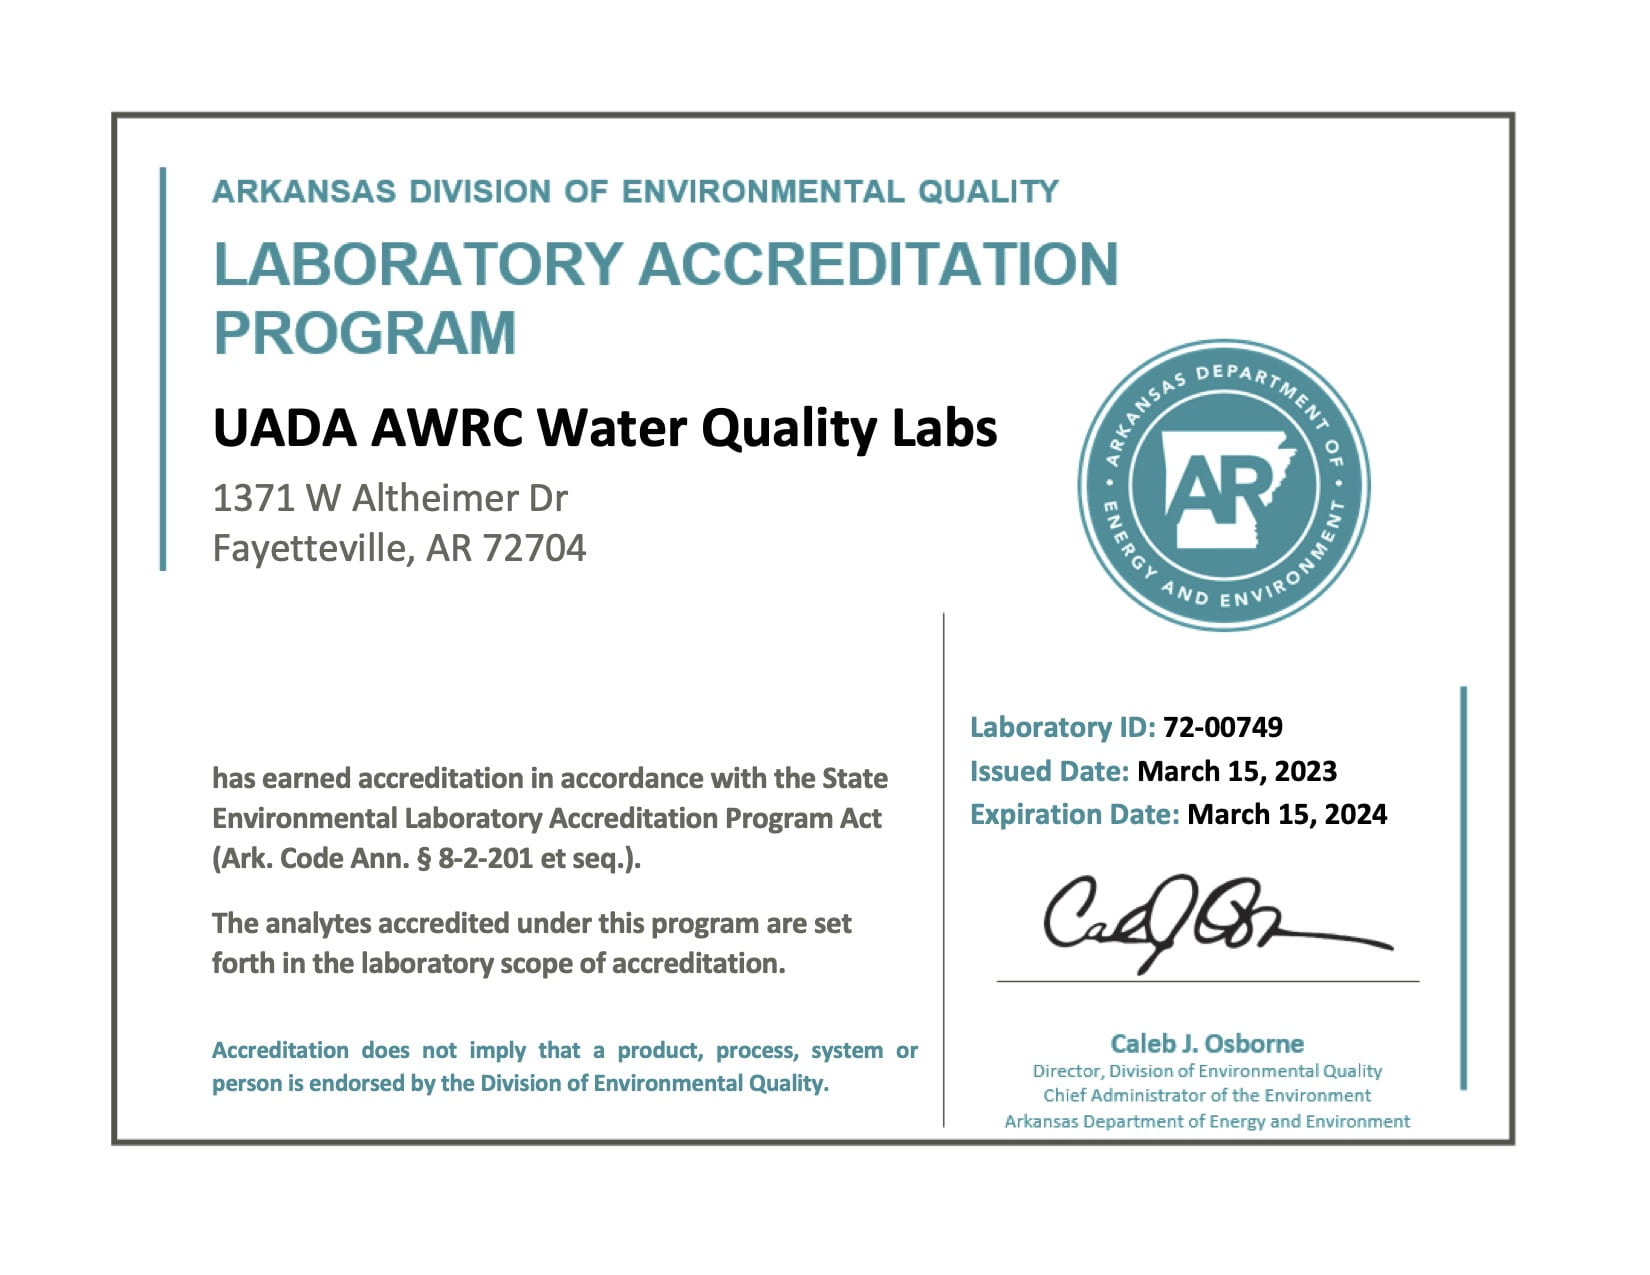 Screenshot of a certificate of accreditation for the AWRC Water Quality Labs.